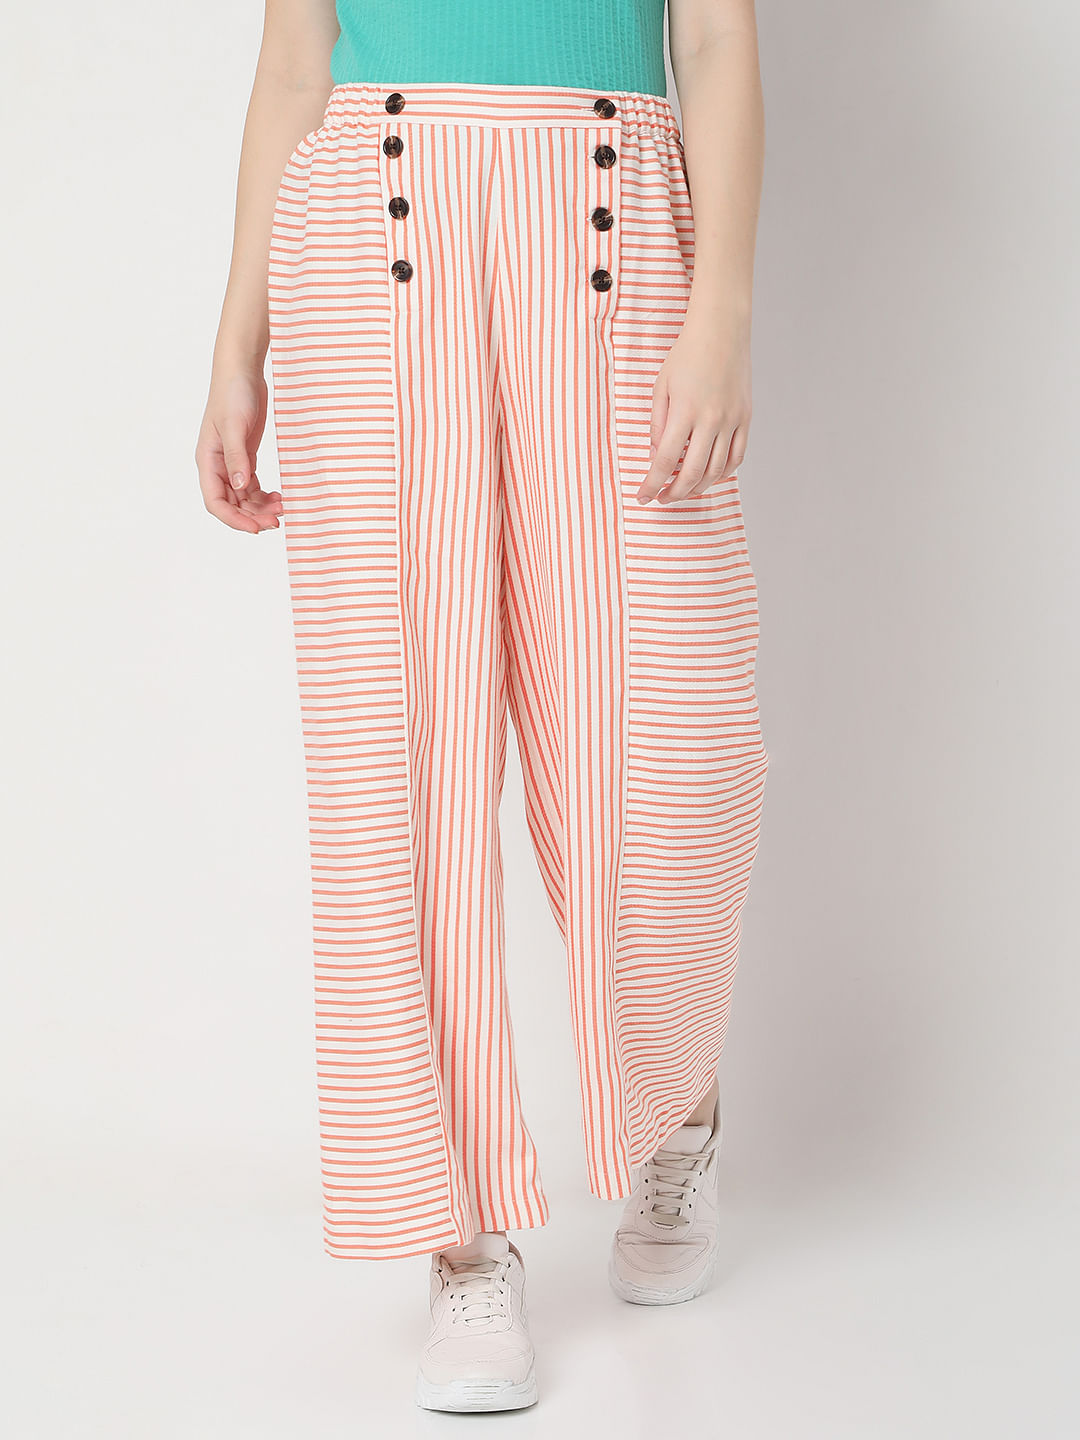 Mast  Harbour Women Brown  Navy Blue Striped Trousers Price in India  Full Specifications  Offers  DTashioncom